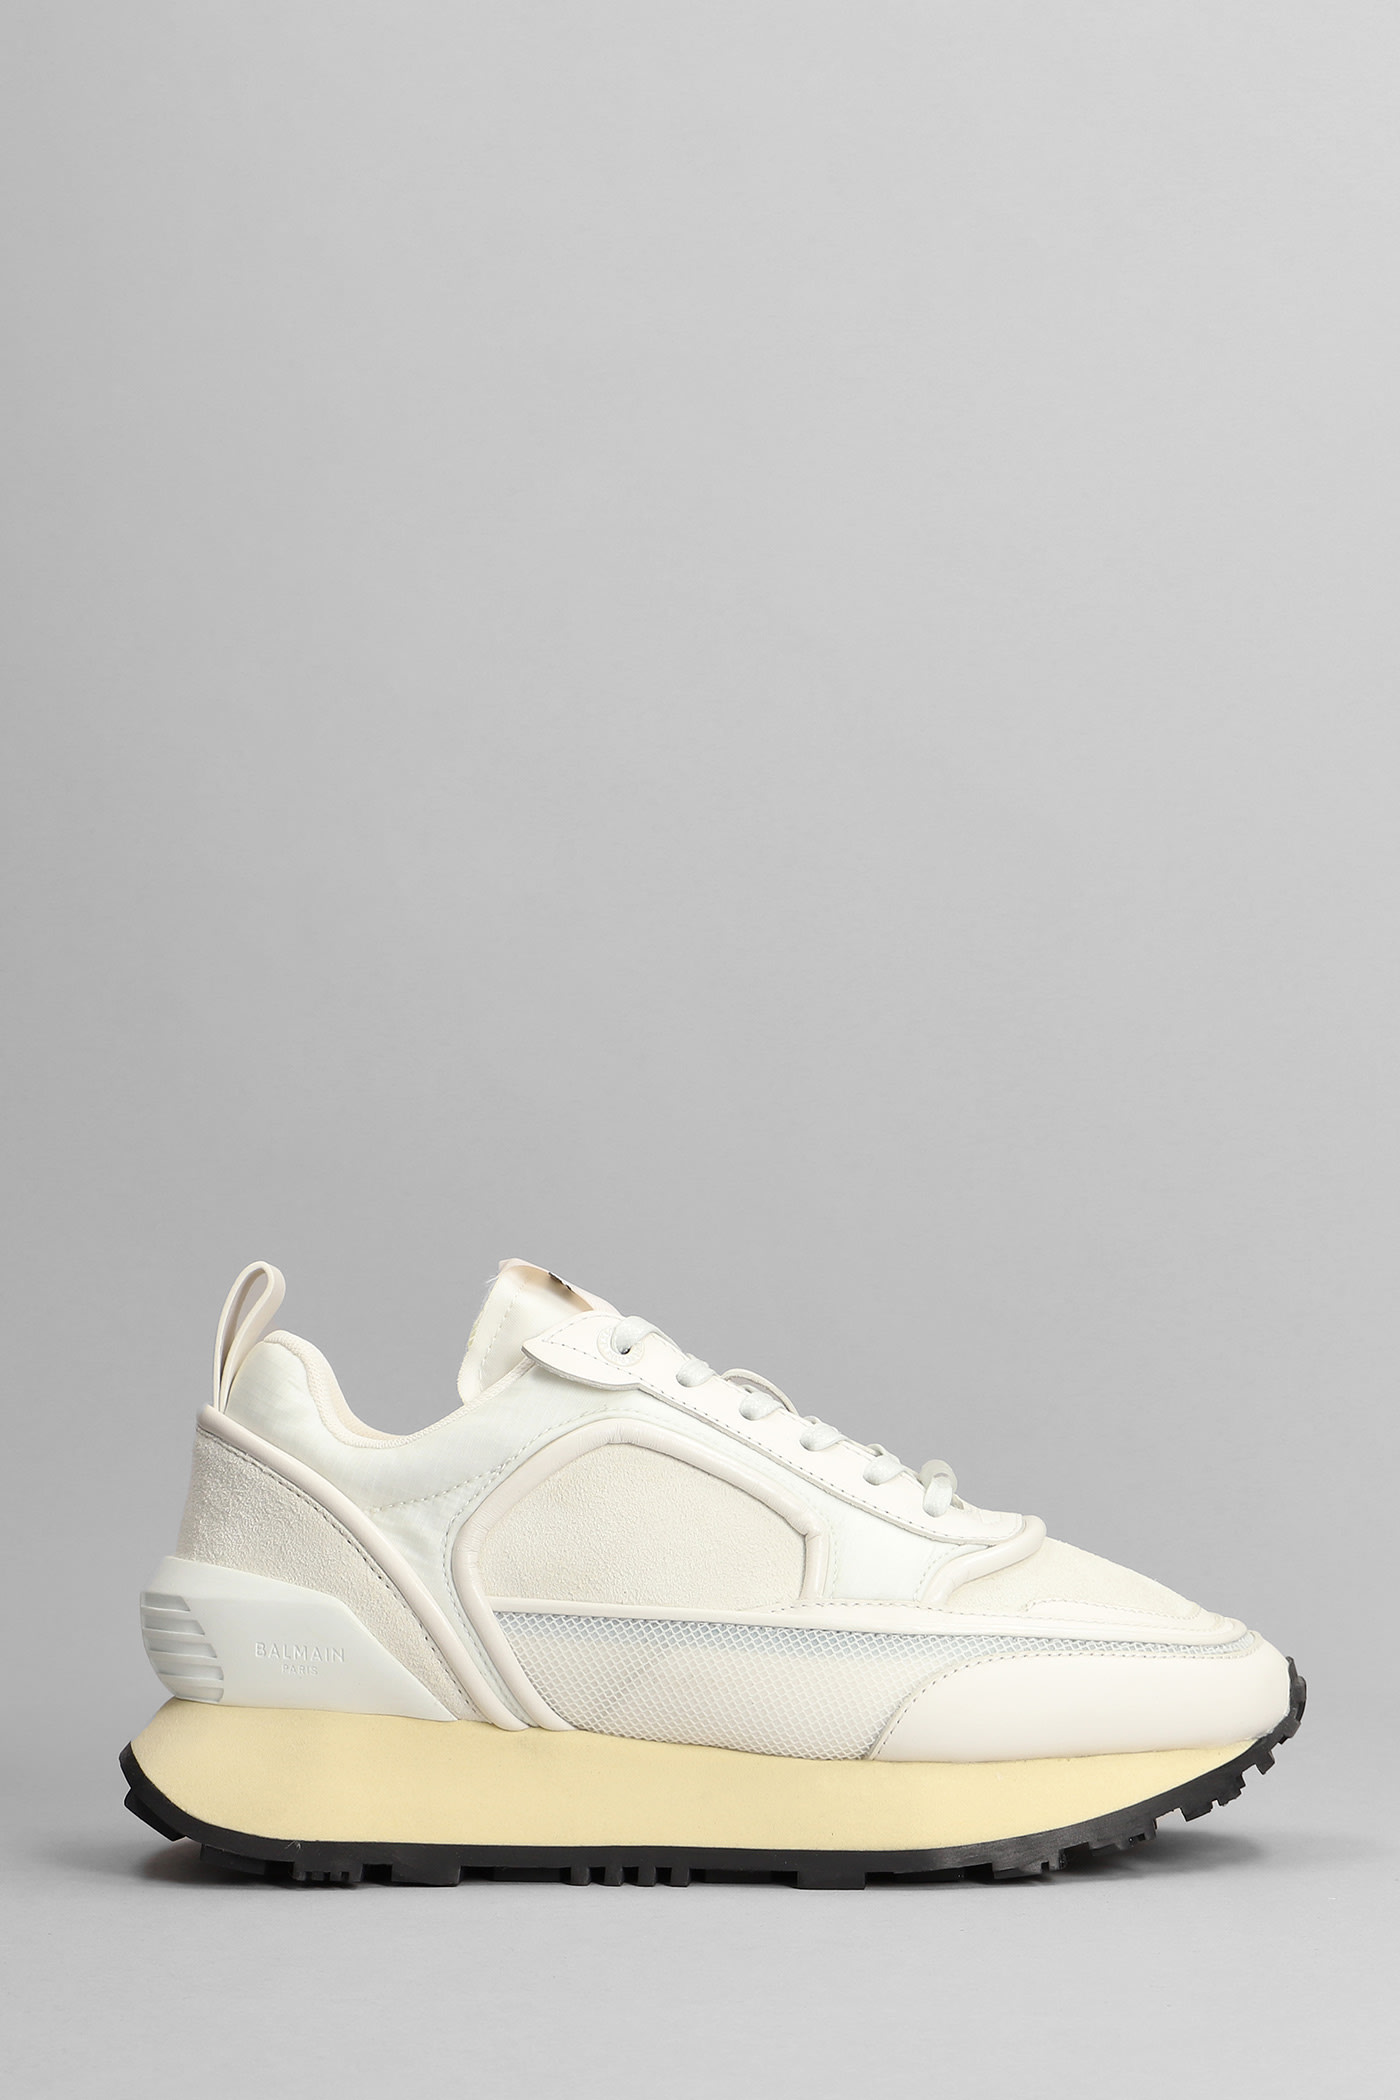 Balmain Sneakers In White Suede And Leather